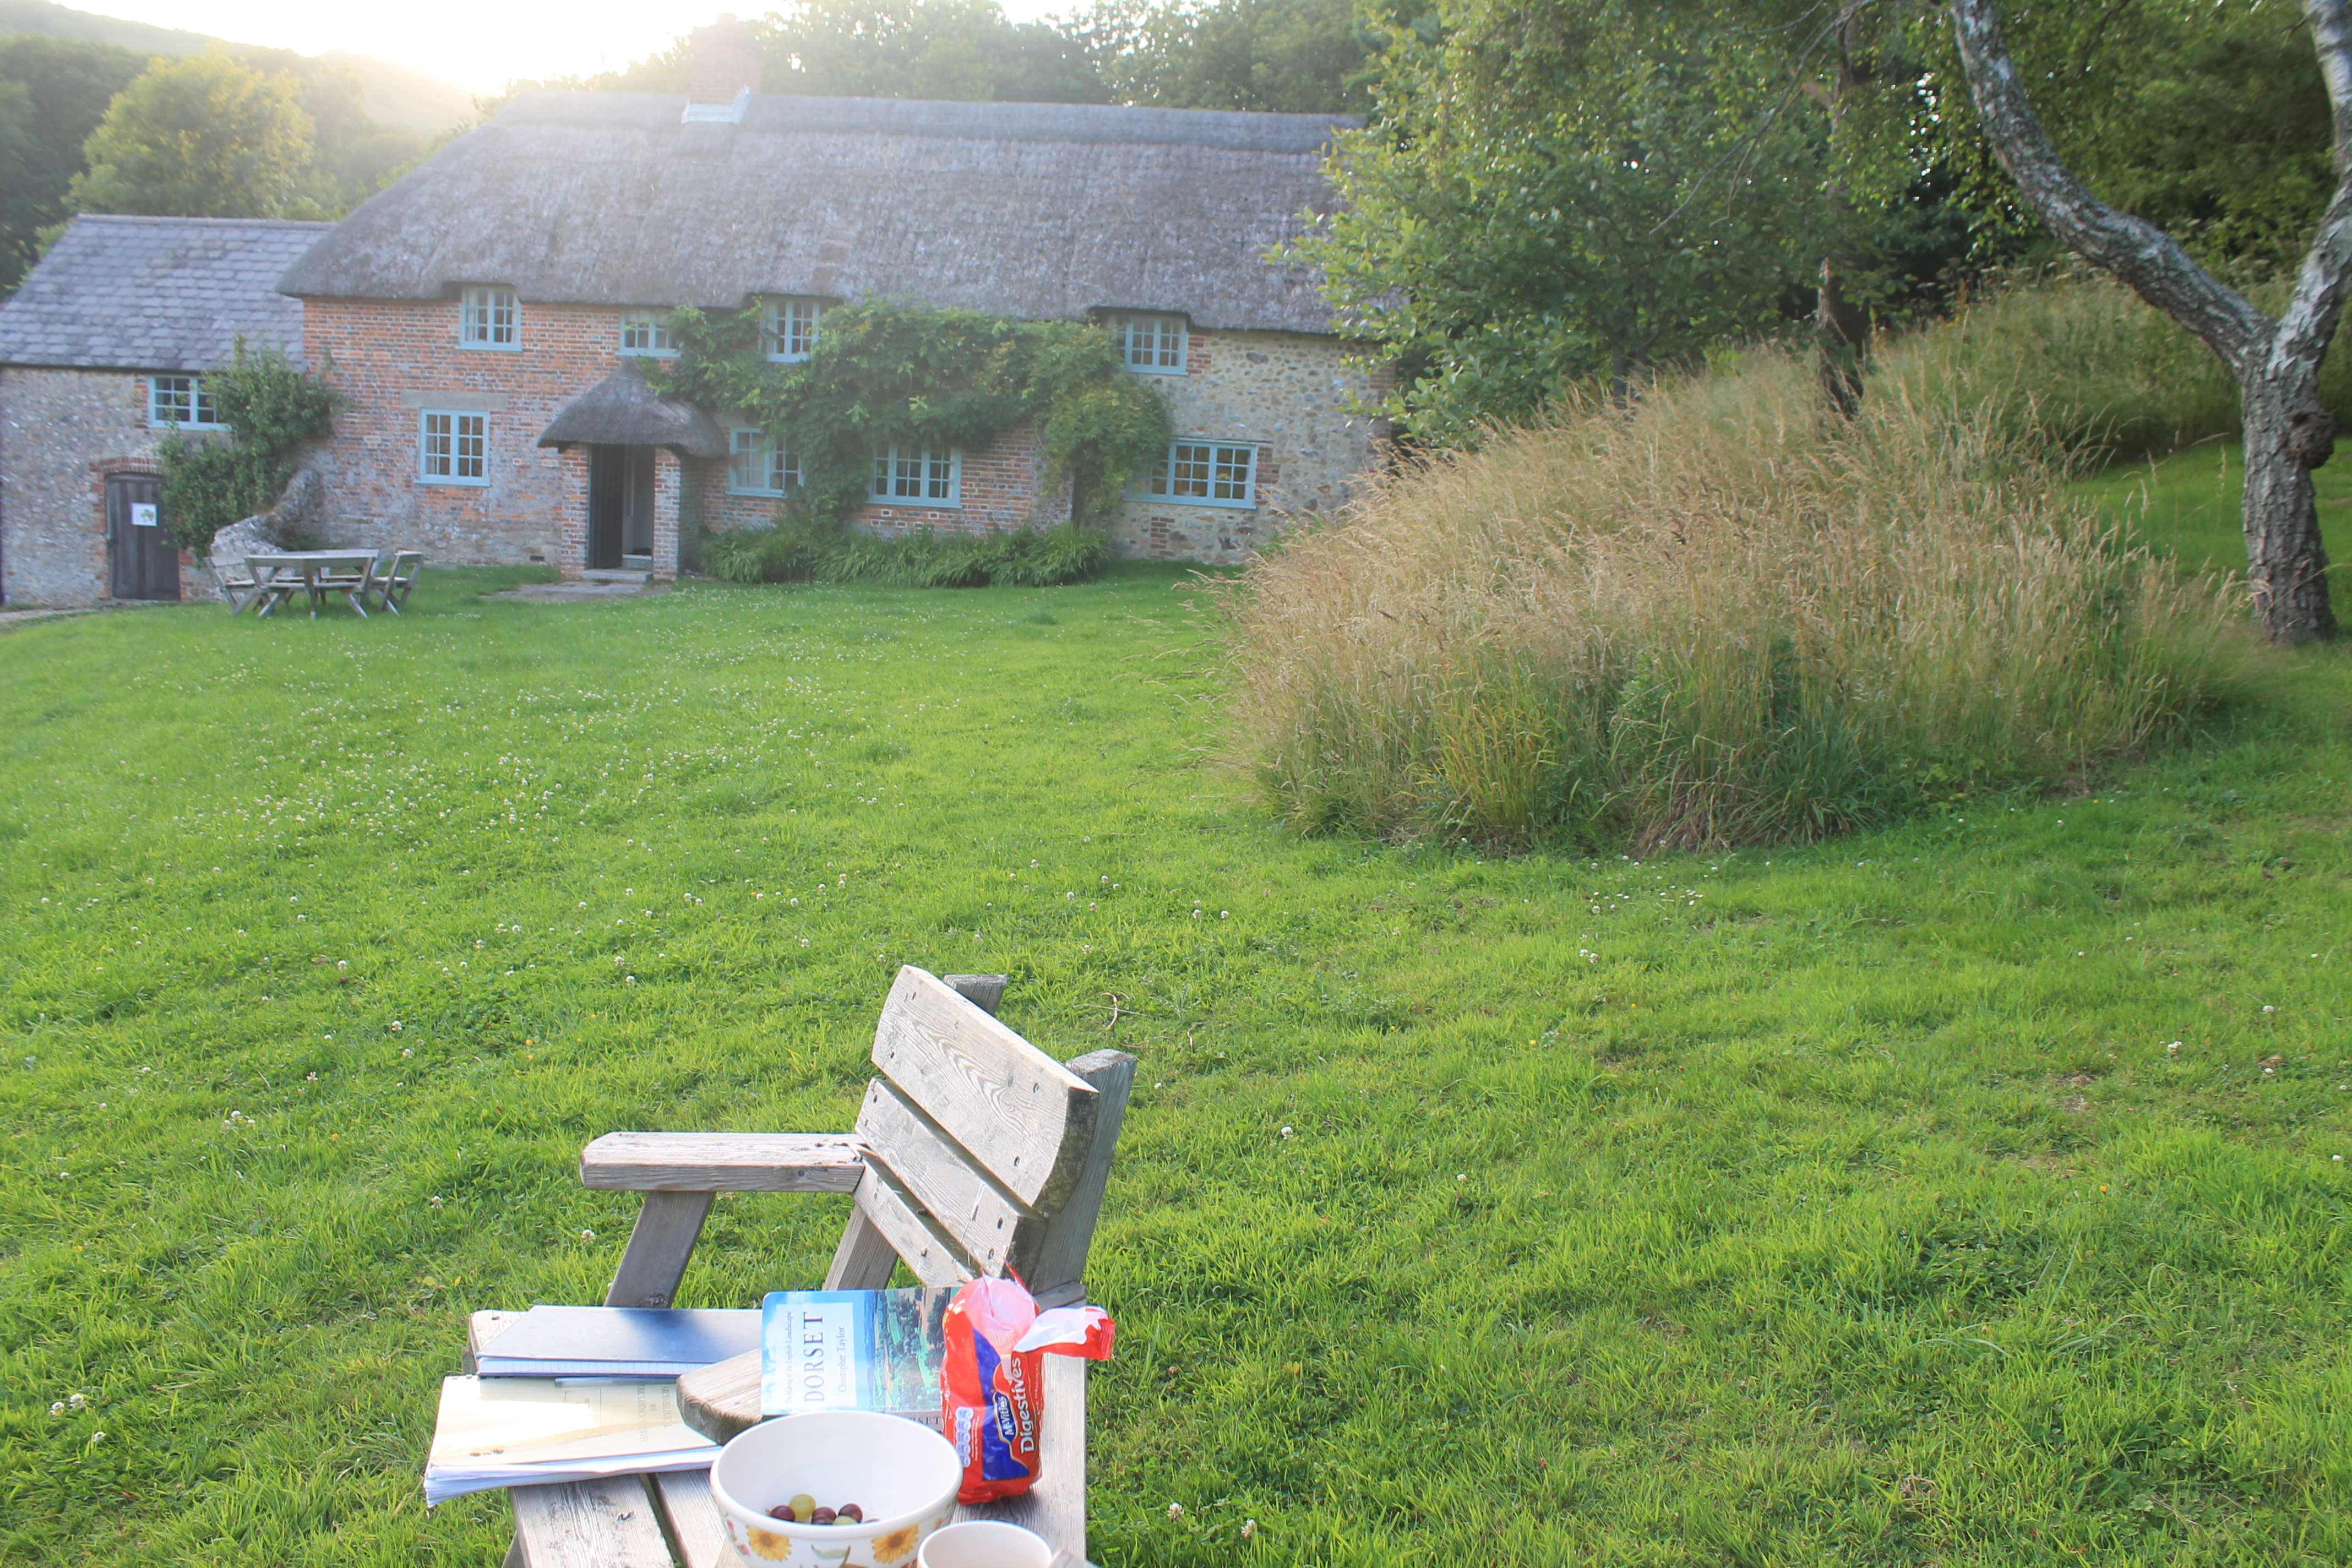 The garden seat at Shedbush Farm, Golden Cap Estate. Time to analyse the evidence and tell the story of the site.